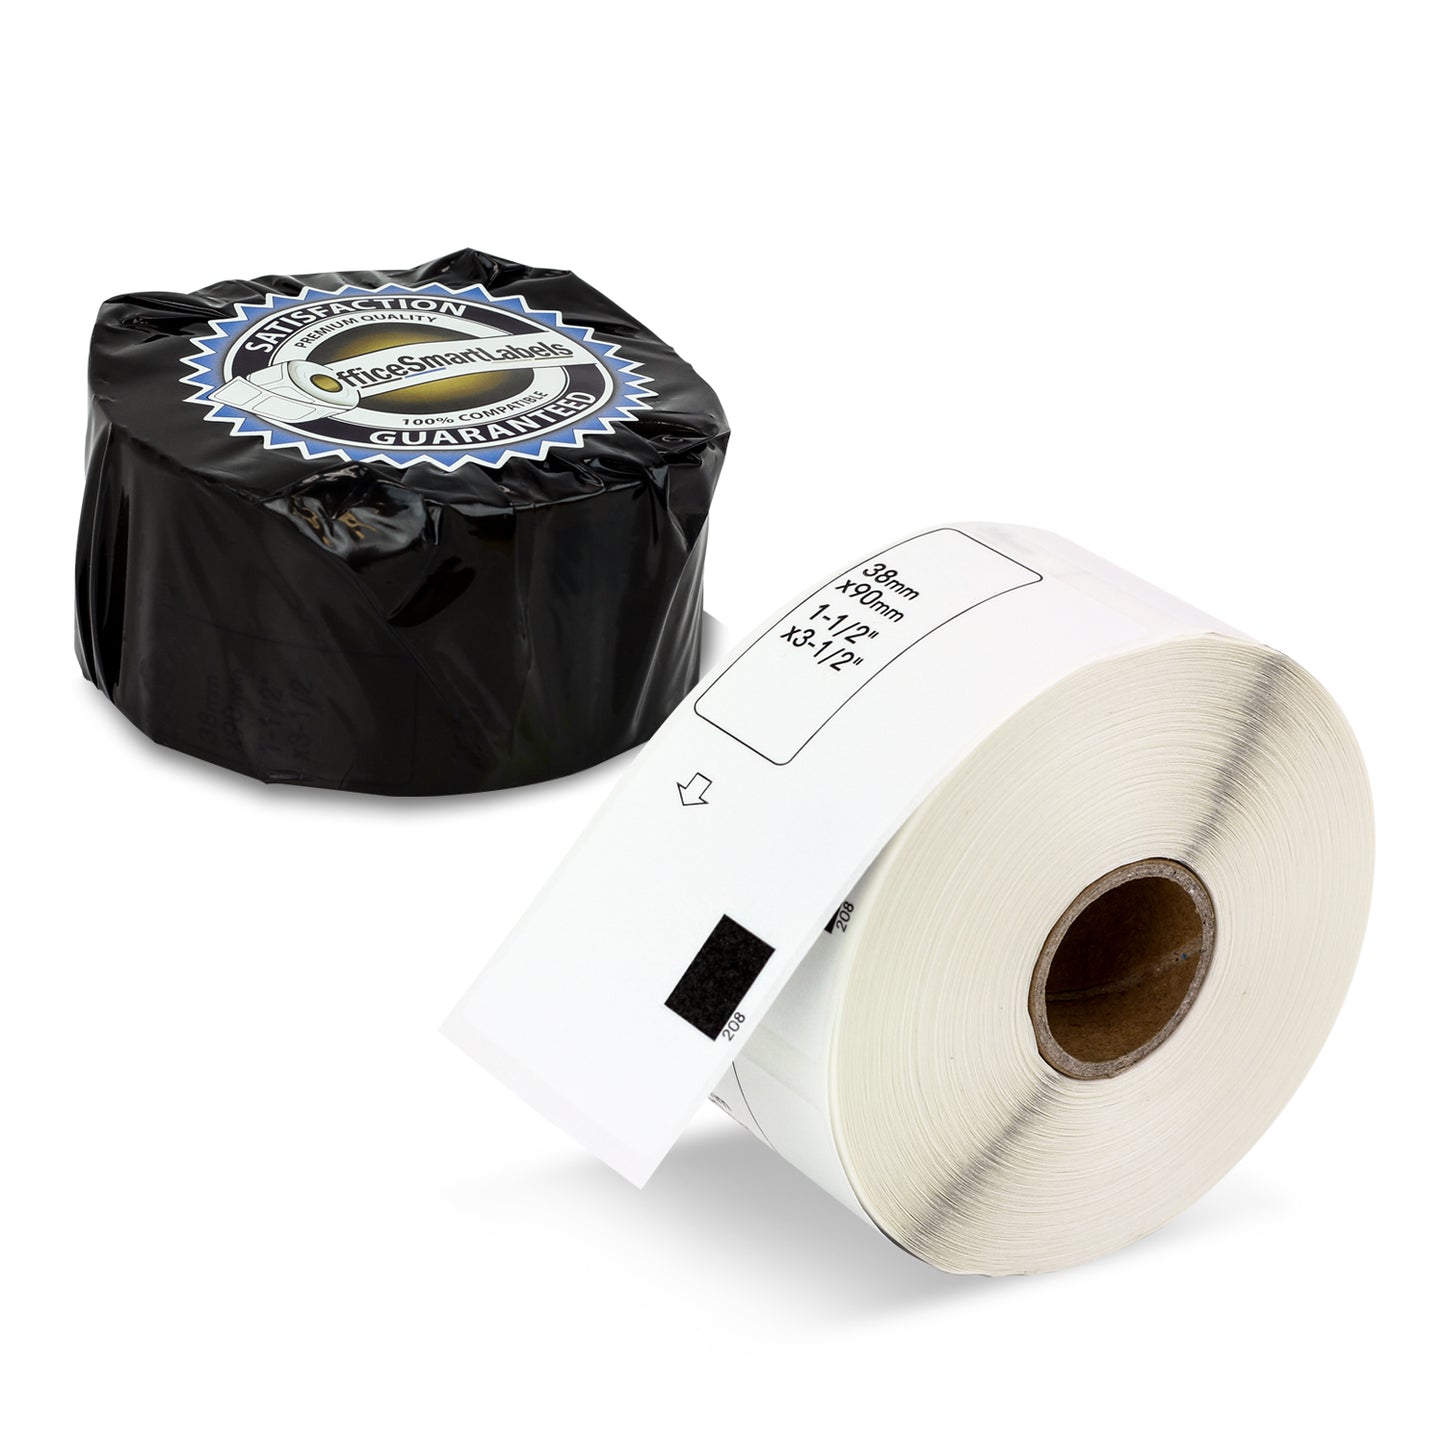 1-1/2 x 3-1/2 inch | Brother DK-1208 Compatible - 1 Roll Without Cartridge